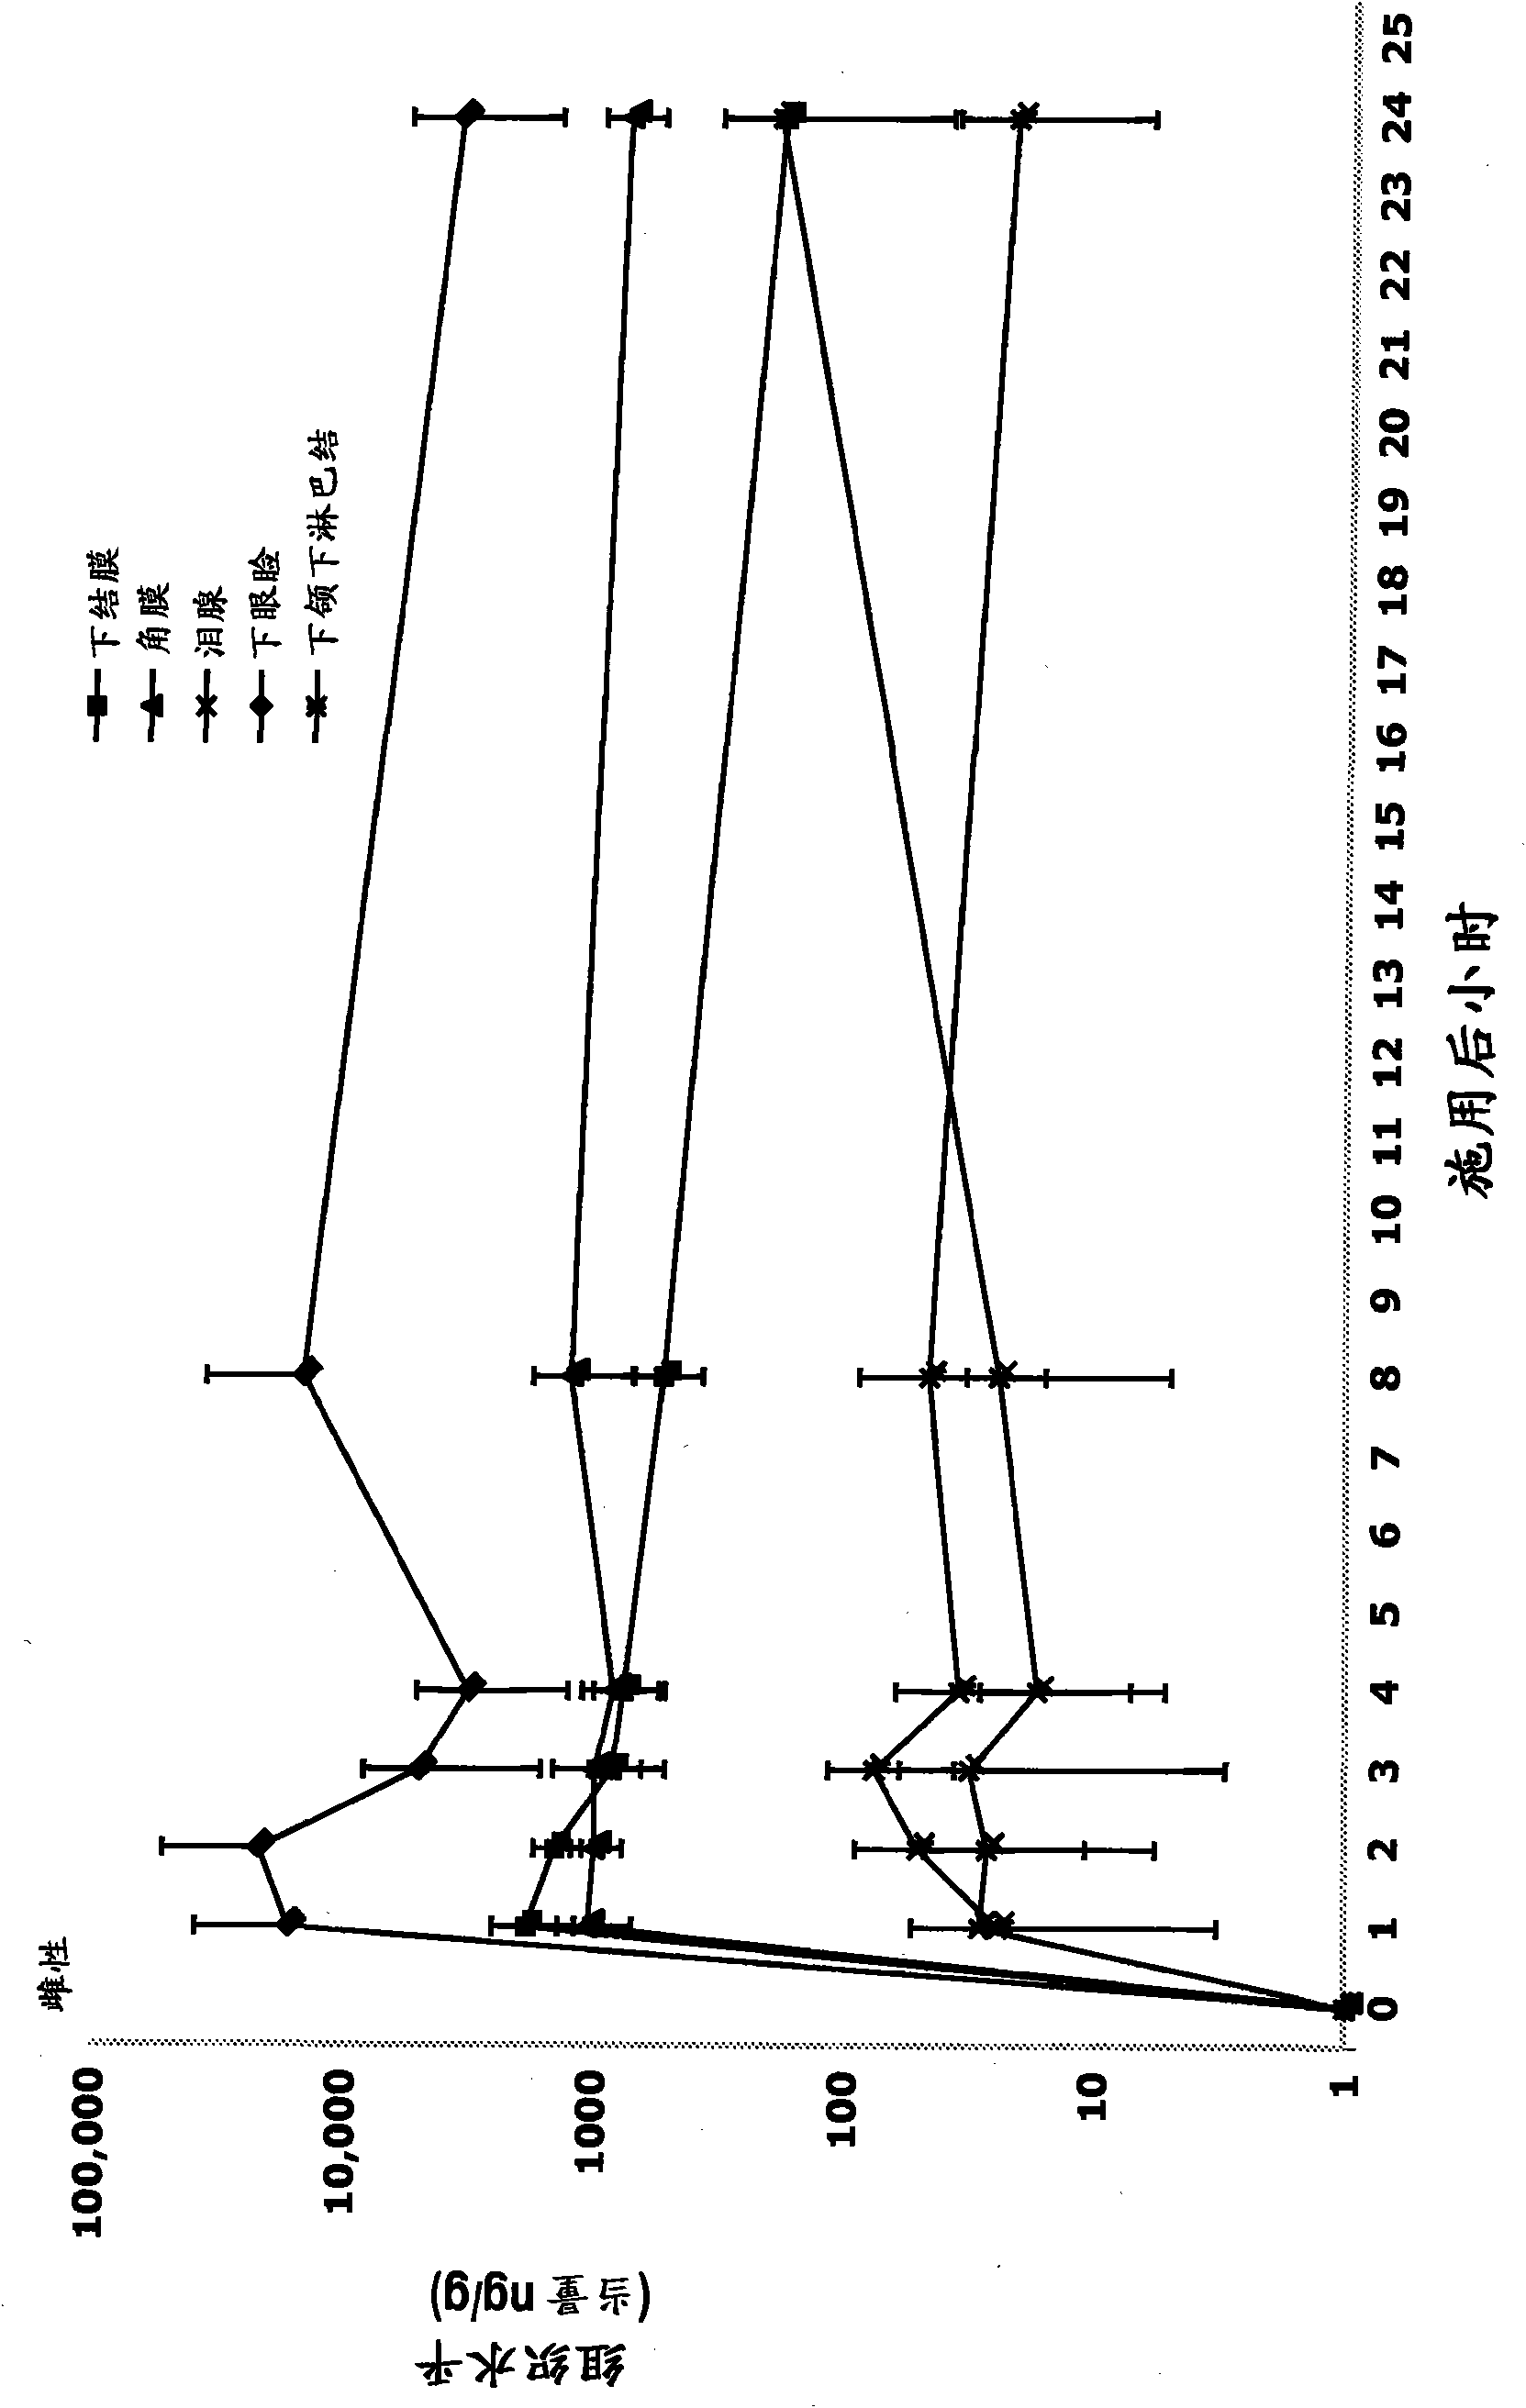 Ophthalmic compositions comprising calcineurin inhibitors or mTOR inhibitors